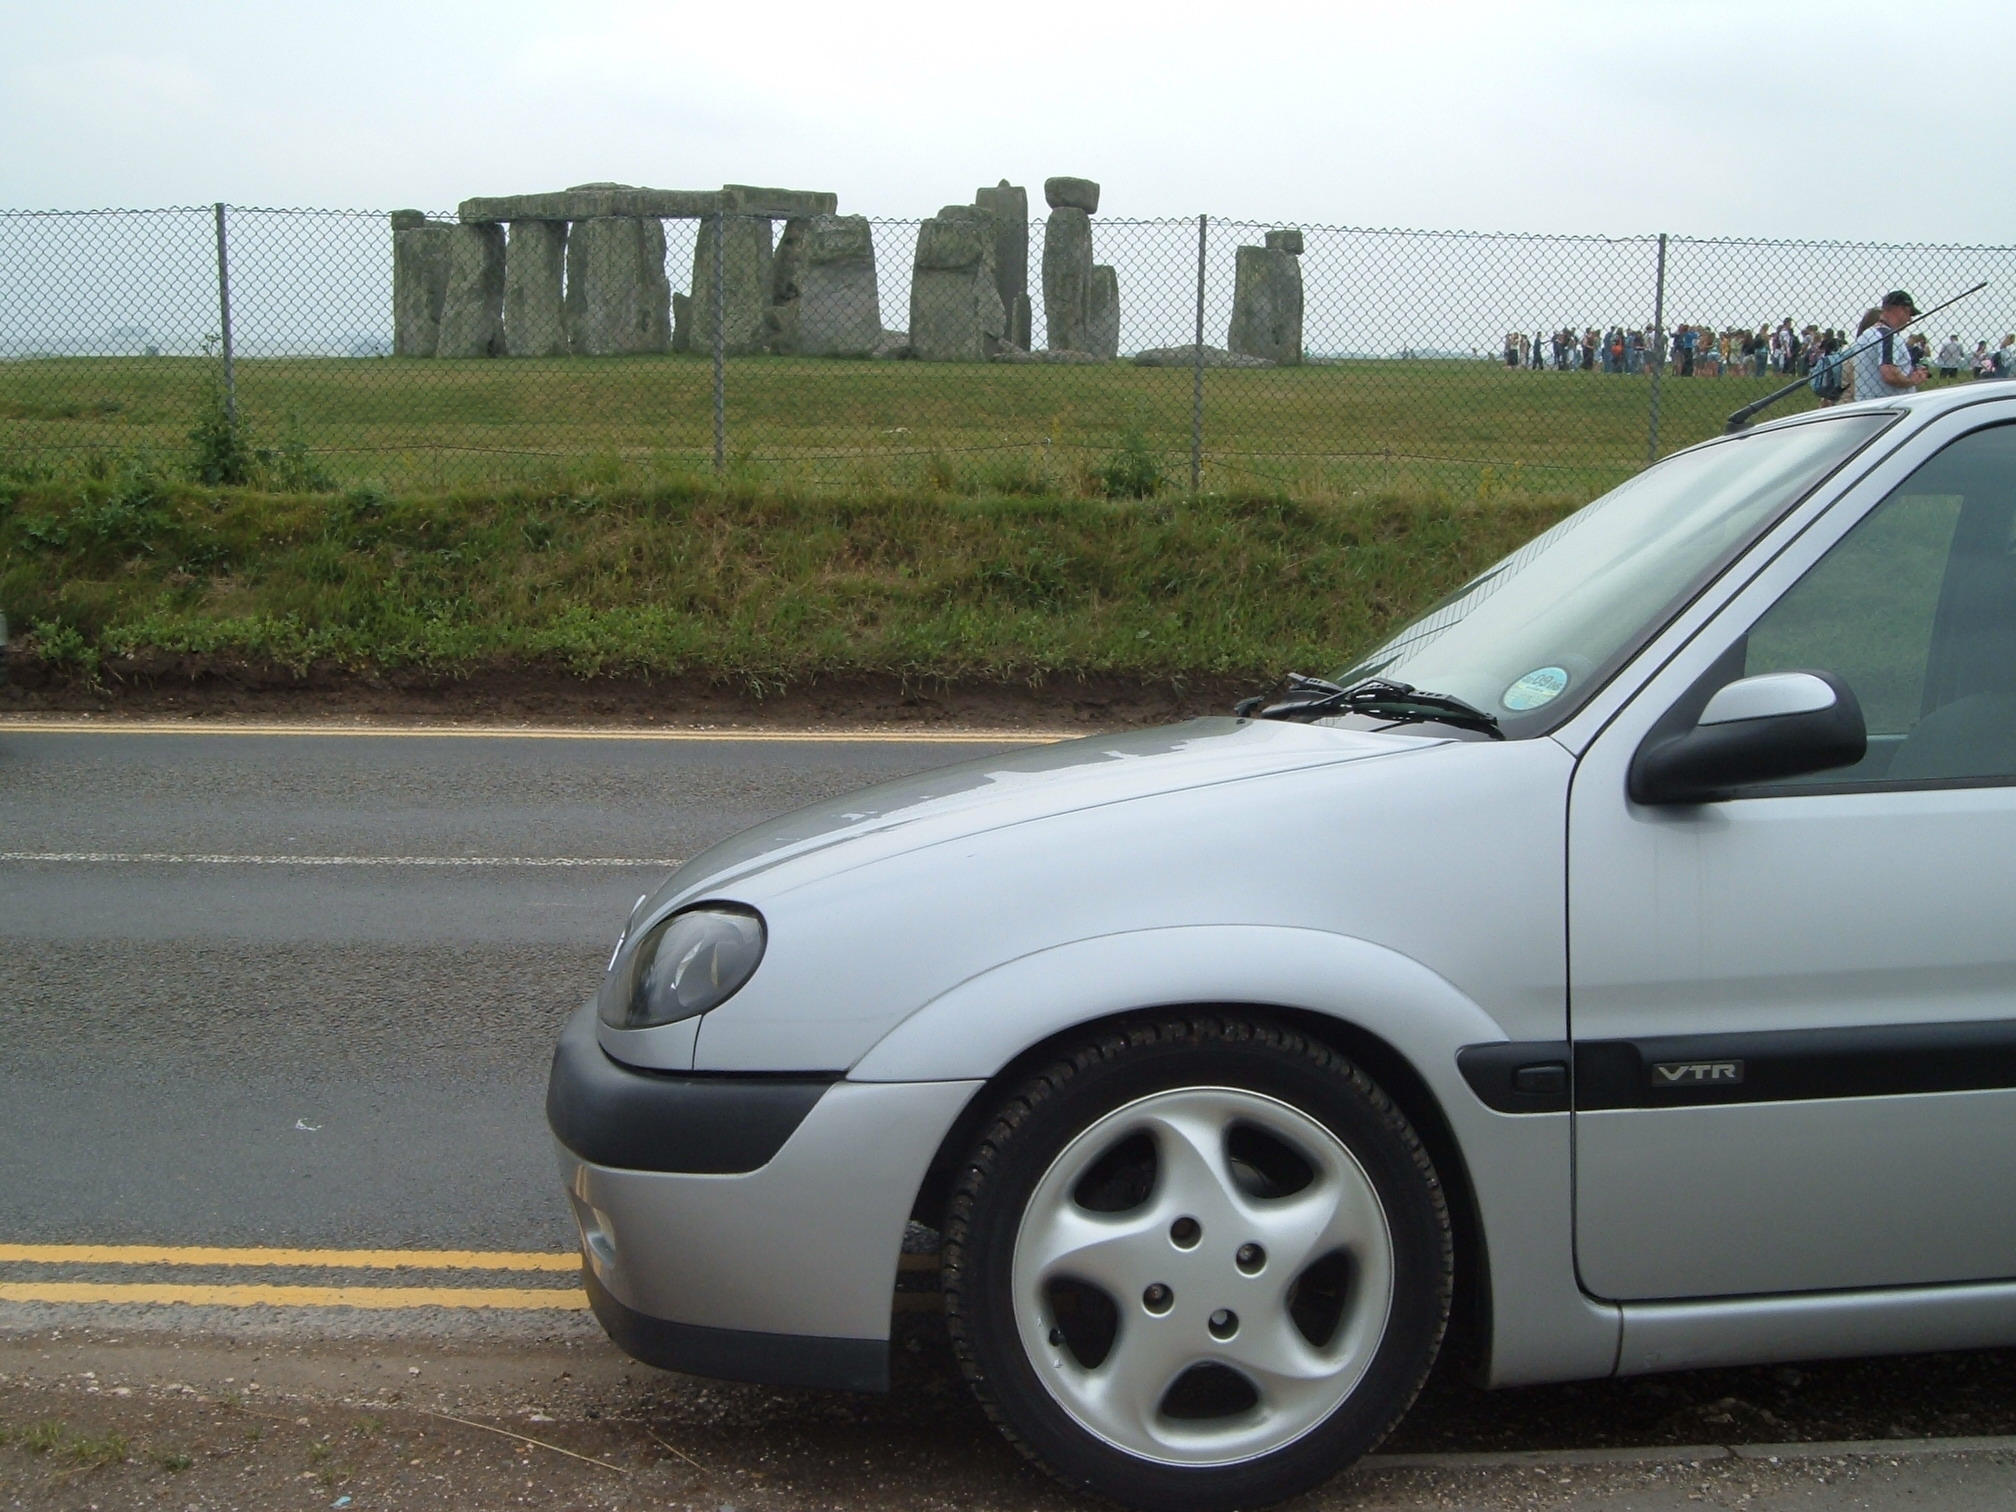 1999 Citroen Saxo VTR? The long and winding road.... - Page 1 - Readers' Cars - PistonHeads